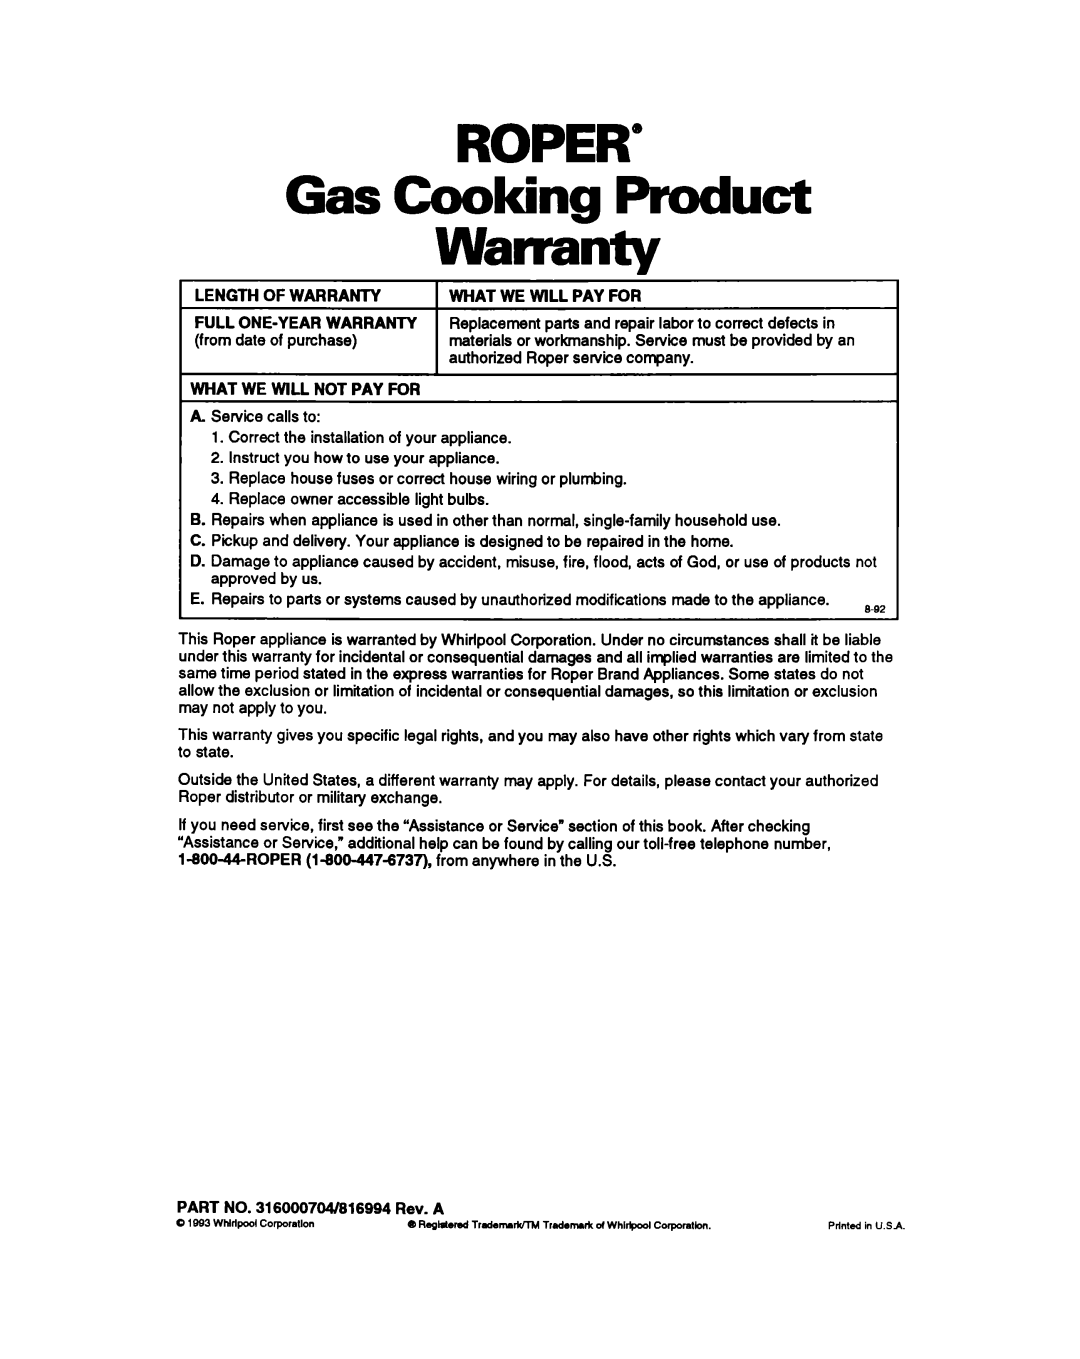 Whirlpool FGS387Y manual ROPER” Gas Cooking Product Warranty 